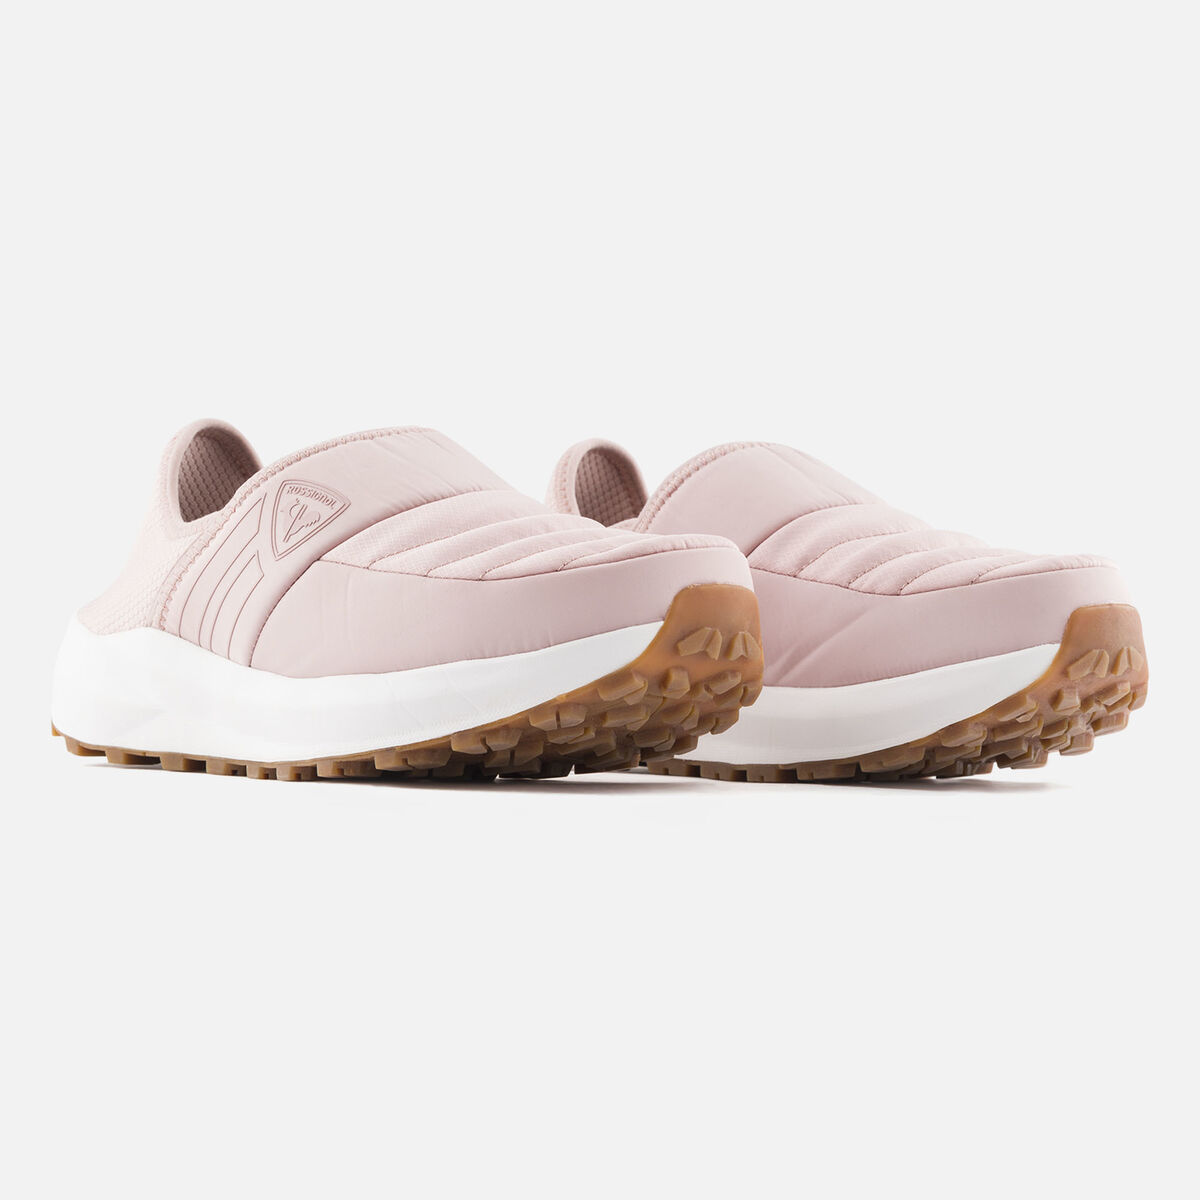 Chaussons d'hiver femme Chalet roses